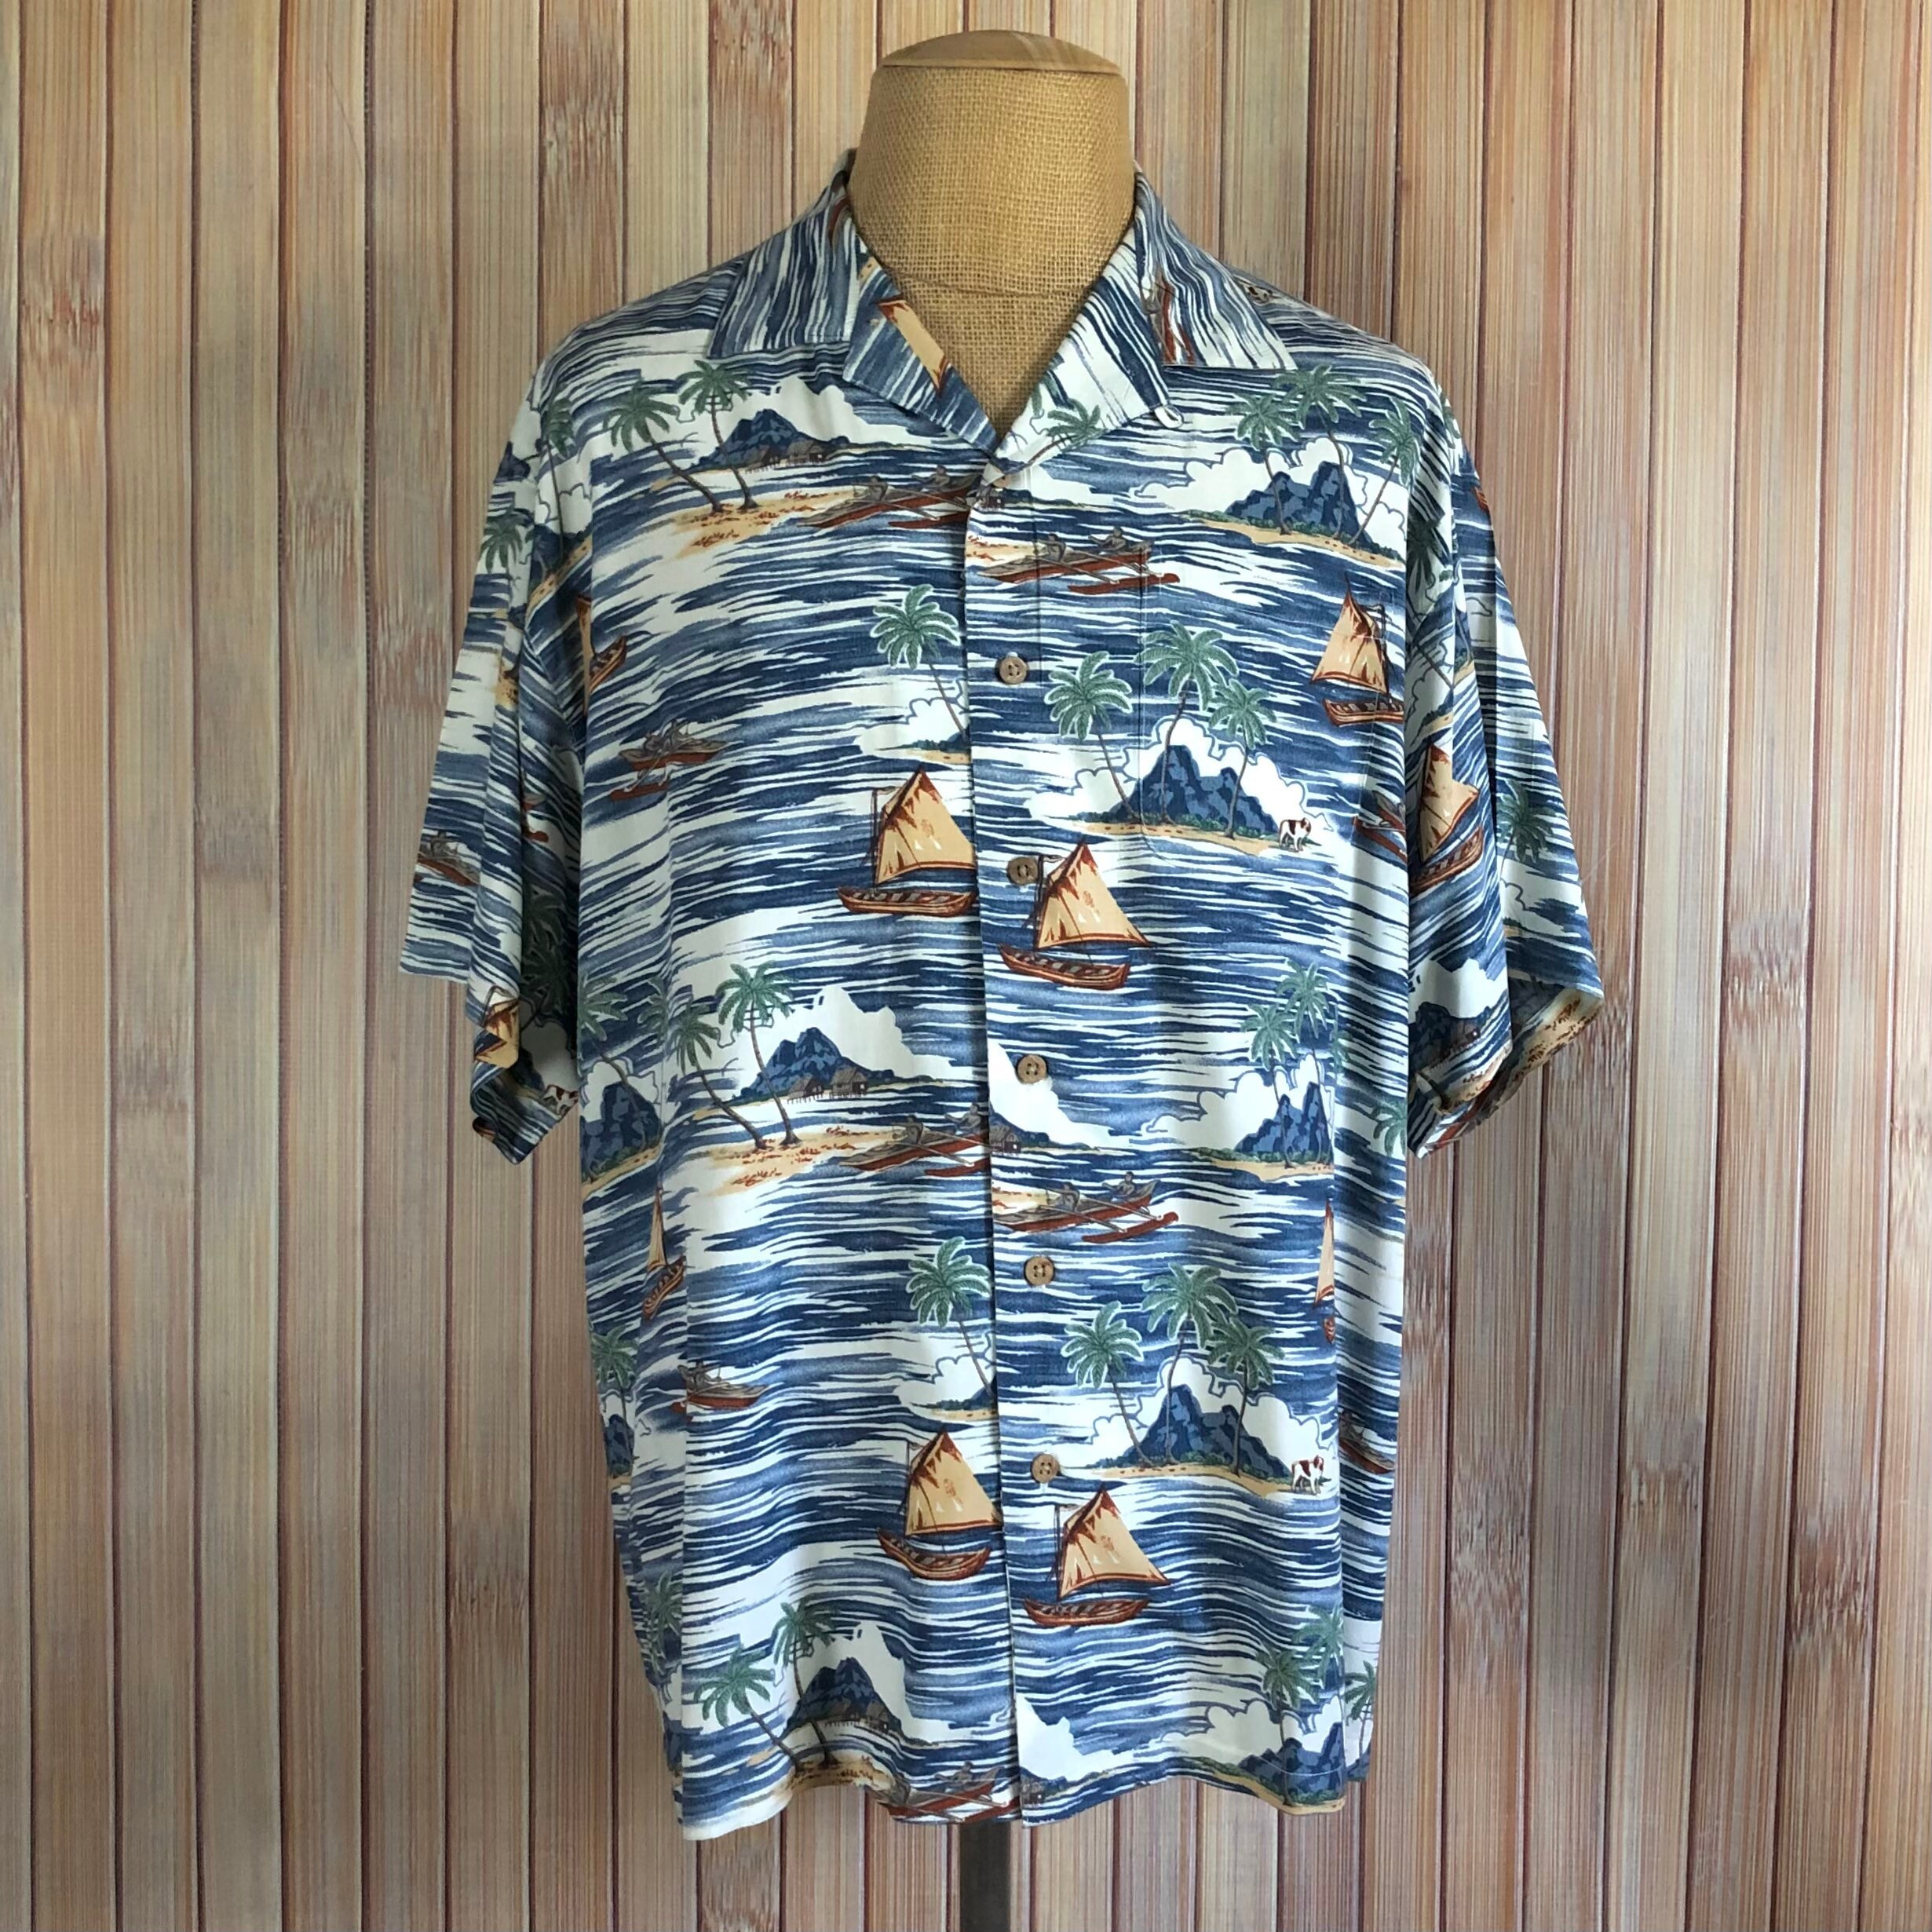 Hawaiian Shirt from Eddie D Black with Tropical Designs Size 4XB